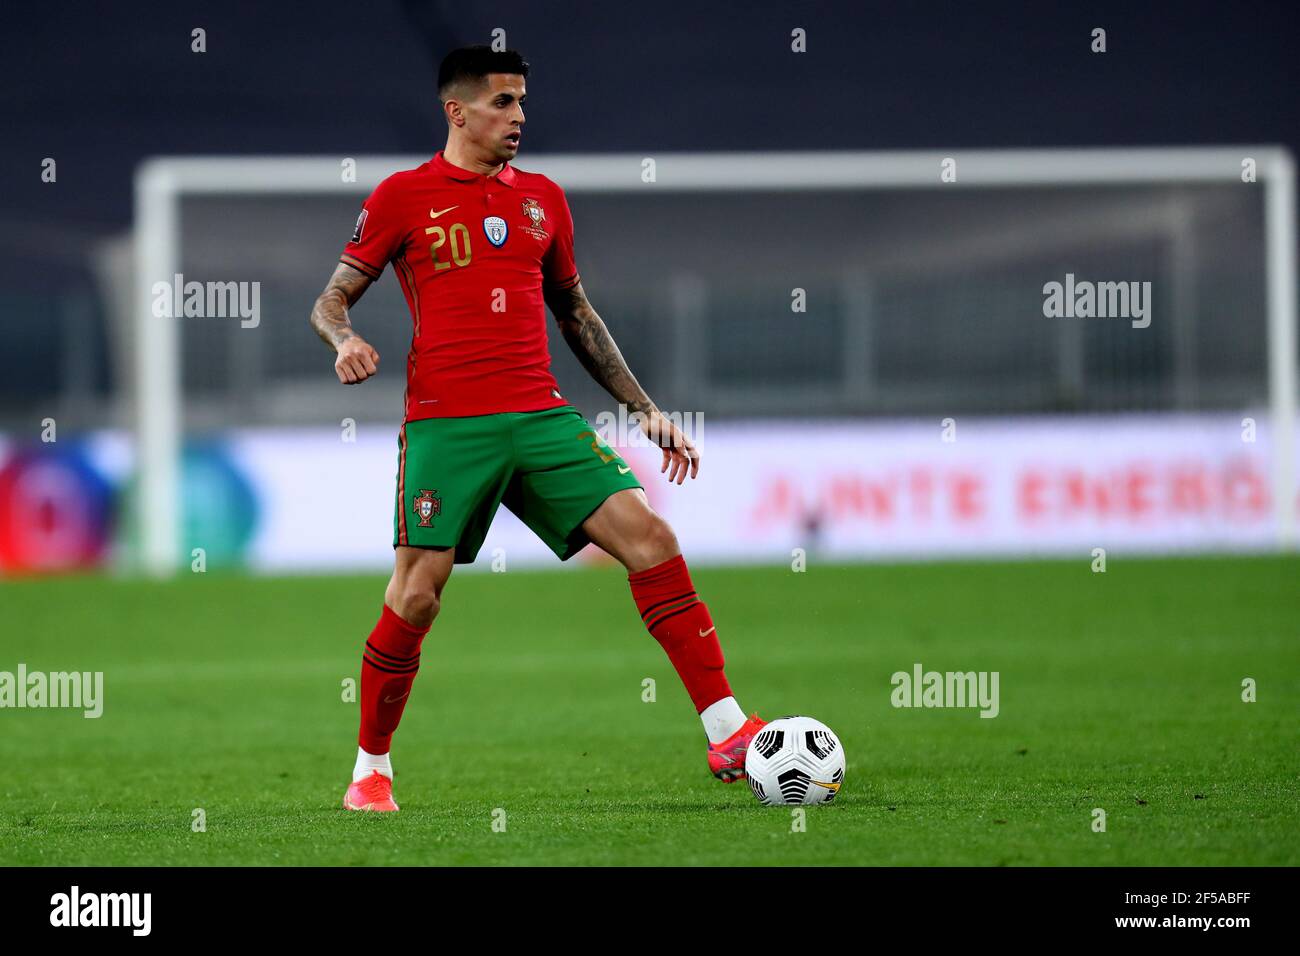 Joao Cancelo of Portugal in action during the FIFA World Cup 2022 Qualifiers match between Portugal and Azerbaijan